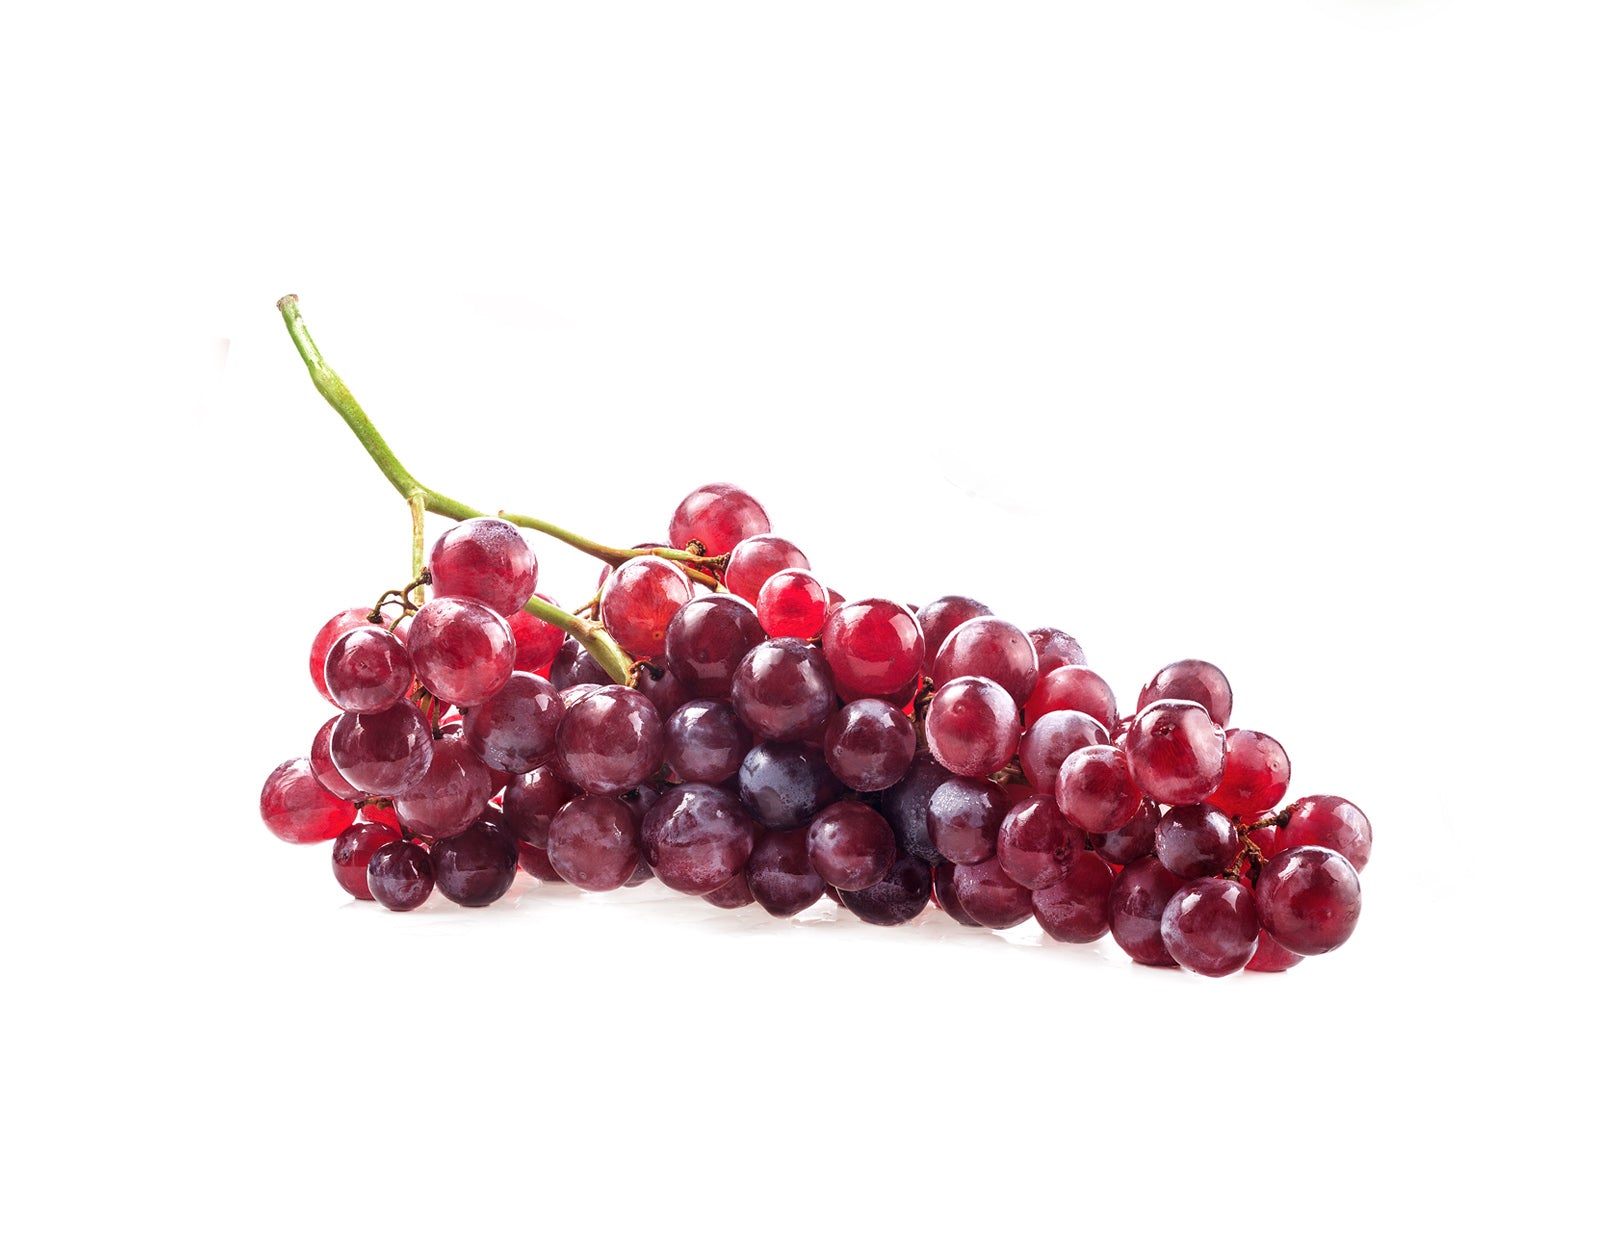 Fresh Veggies SG Fresh Vegetables Online Delivery in Singapore-Red Grapes